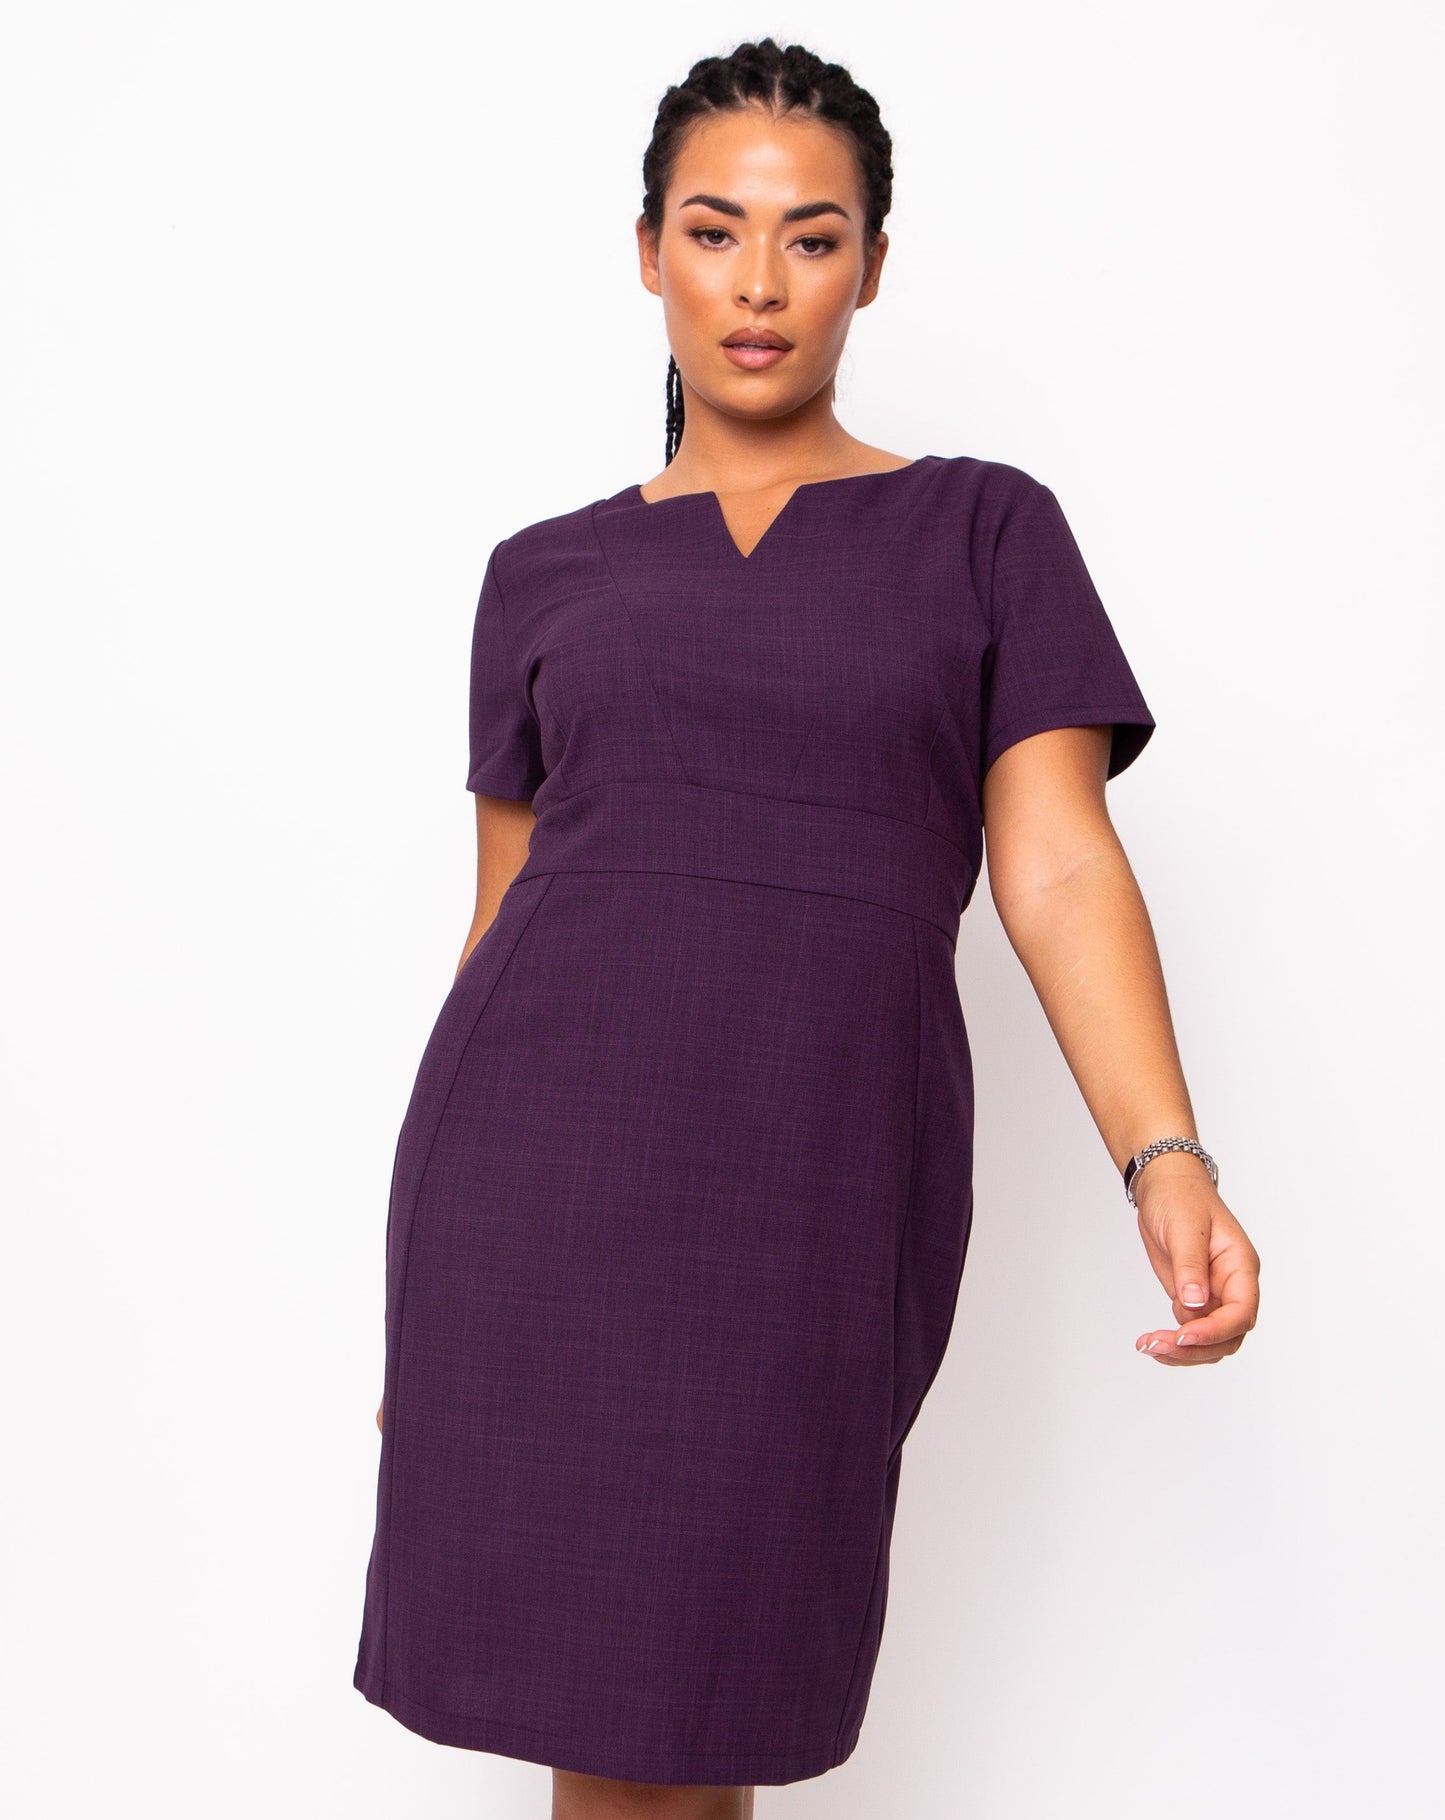 Couture V-Neck Work Dress (Textured Stretch)